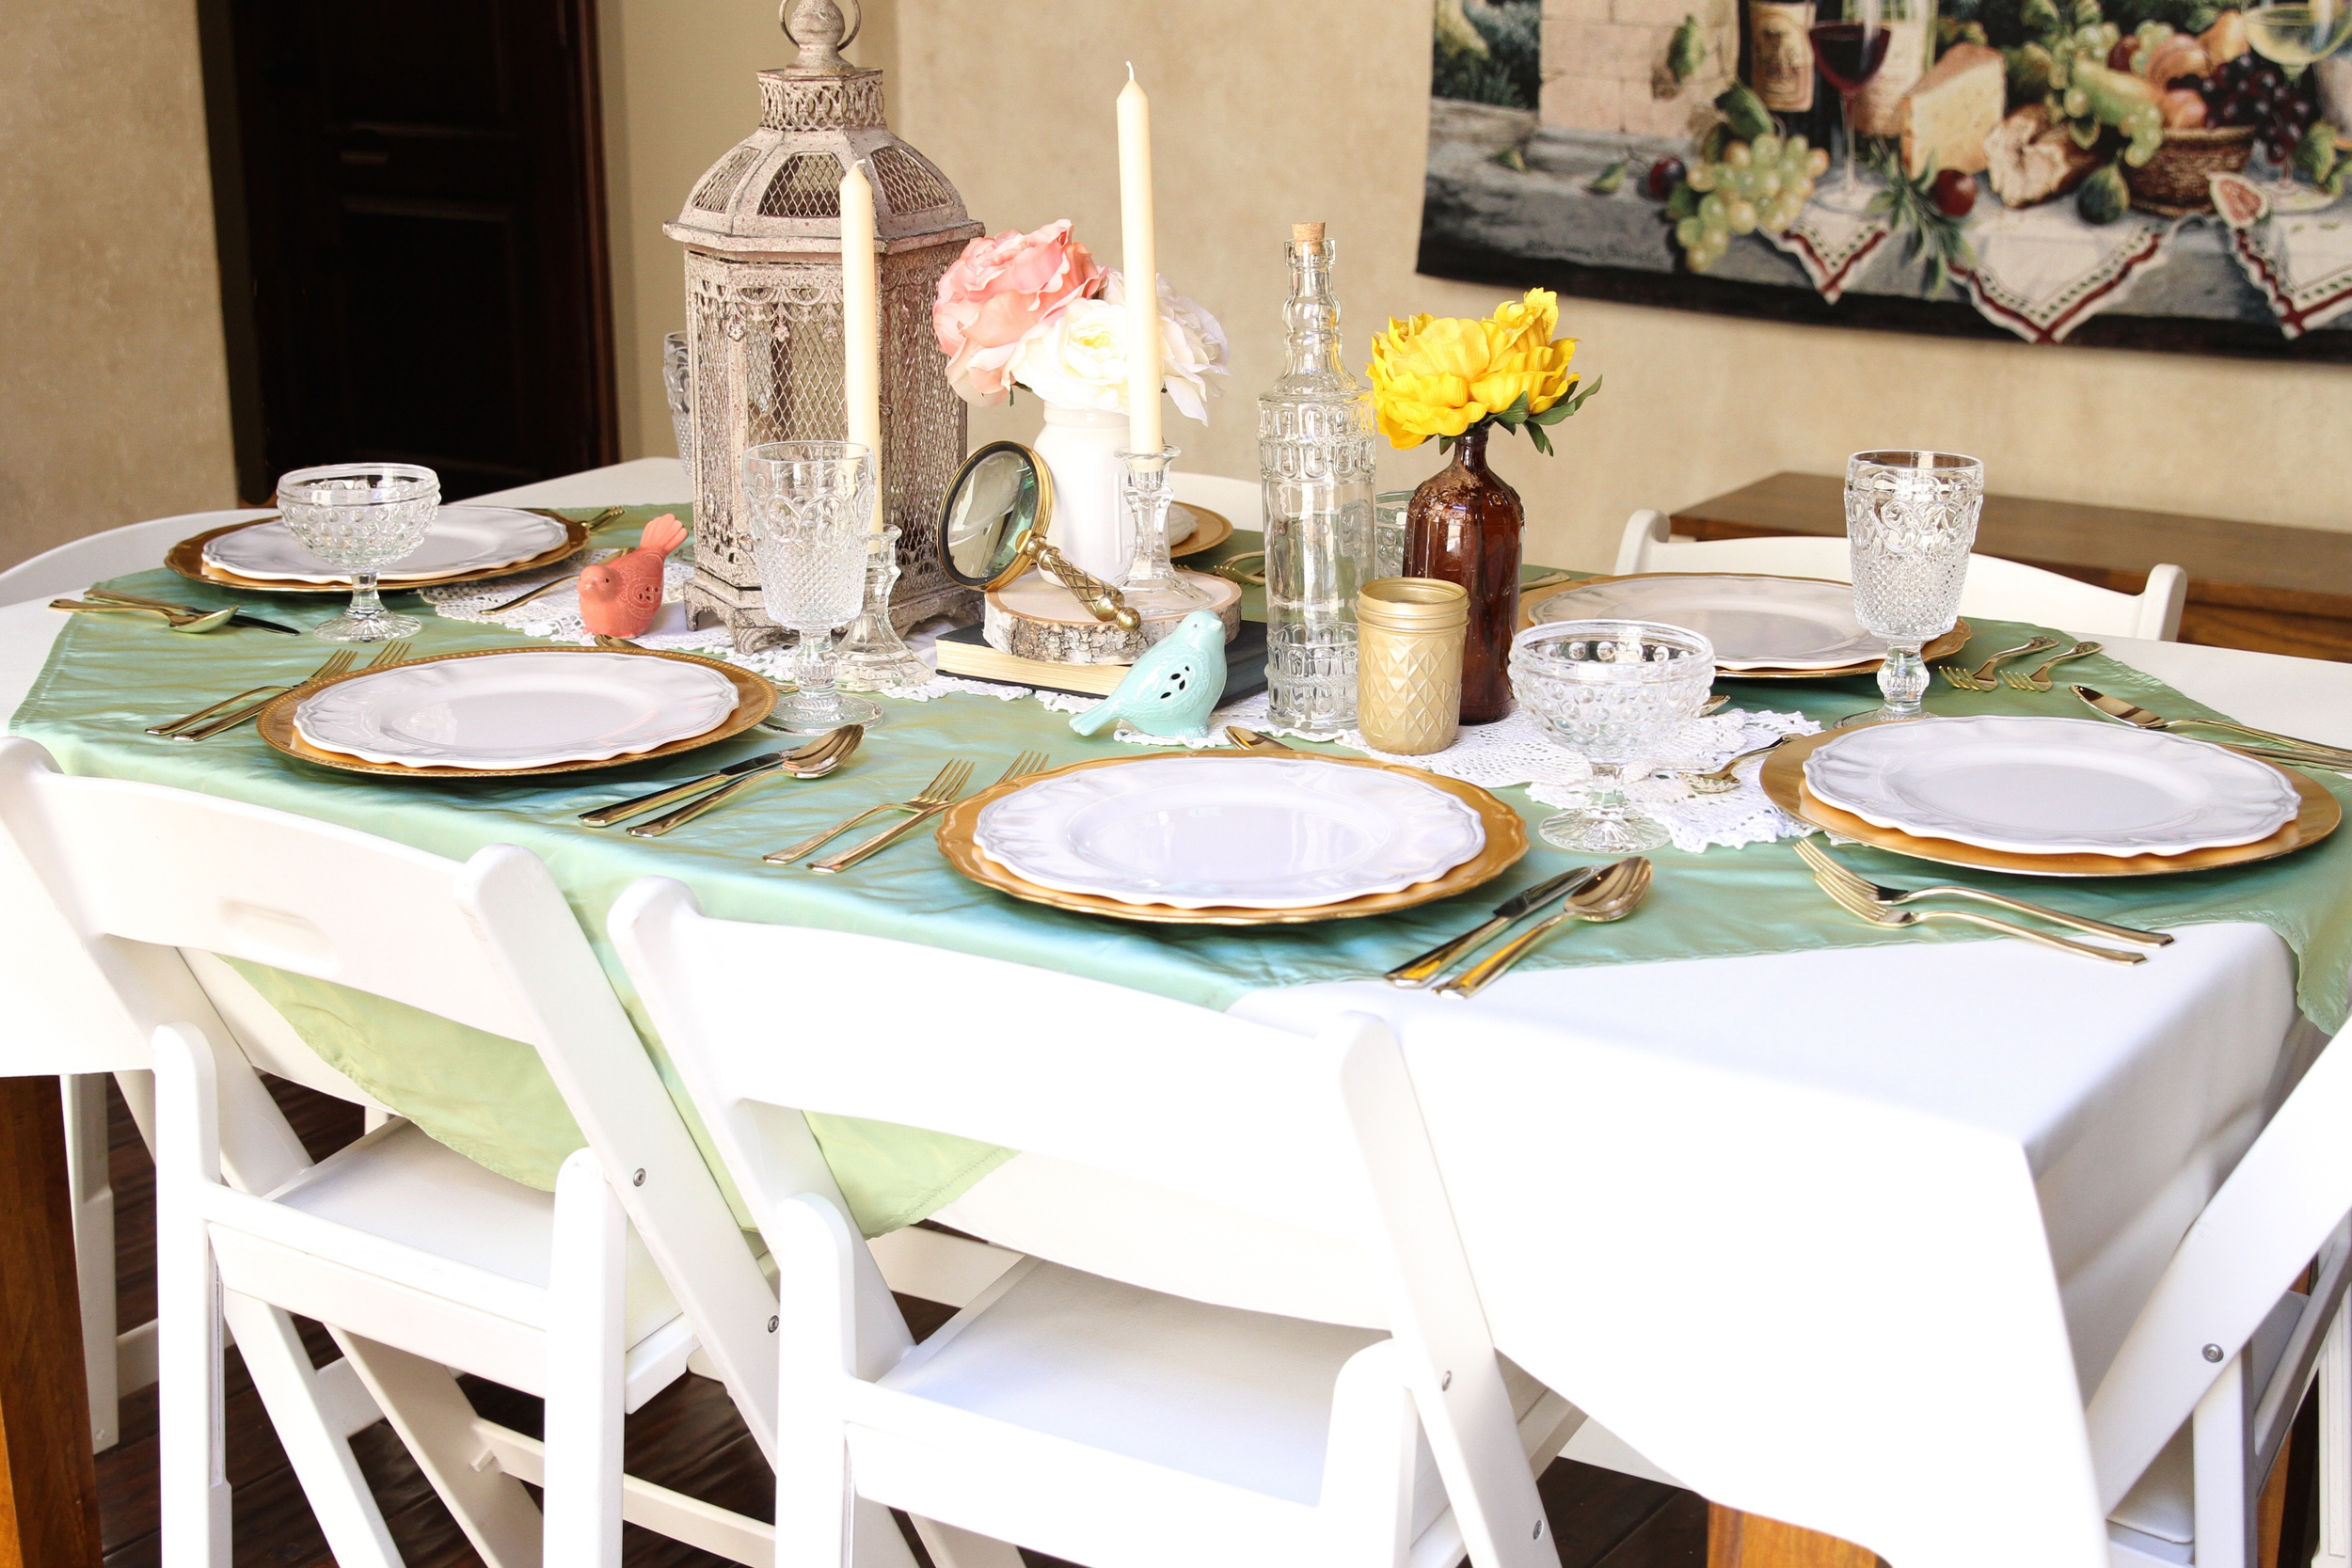 Copy of A perfect baby shower setup. A Vintage Bird Themed Baby Shower - Ready to Rent from @inJOYtheParty!